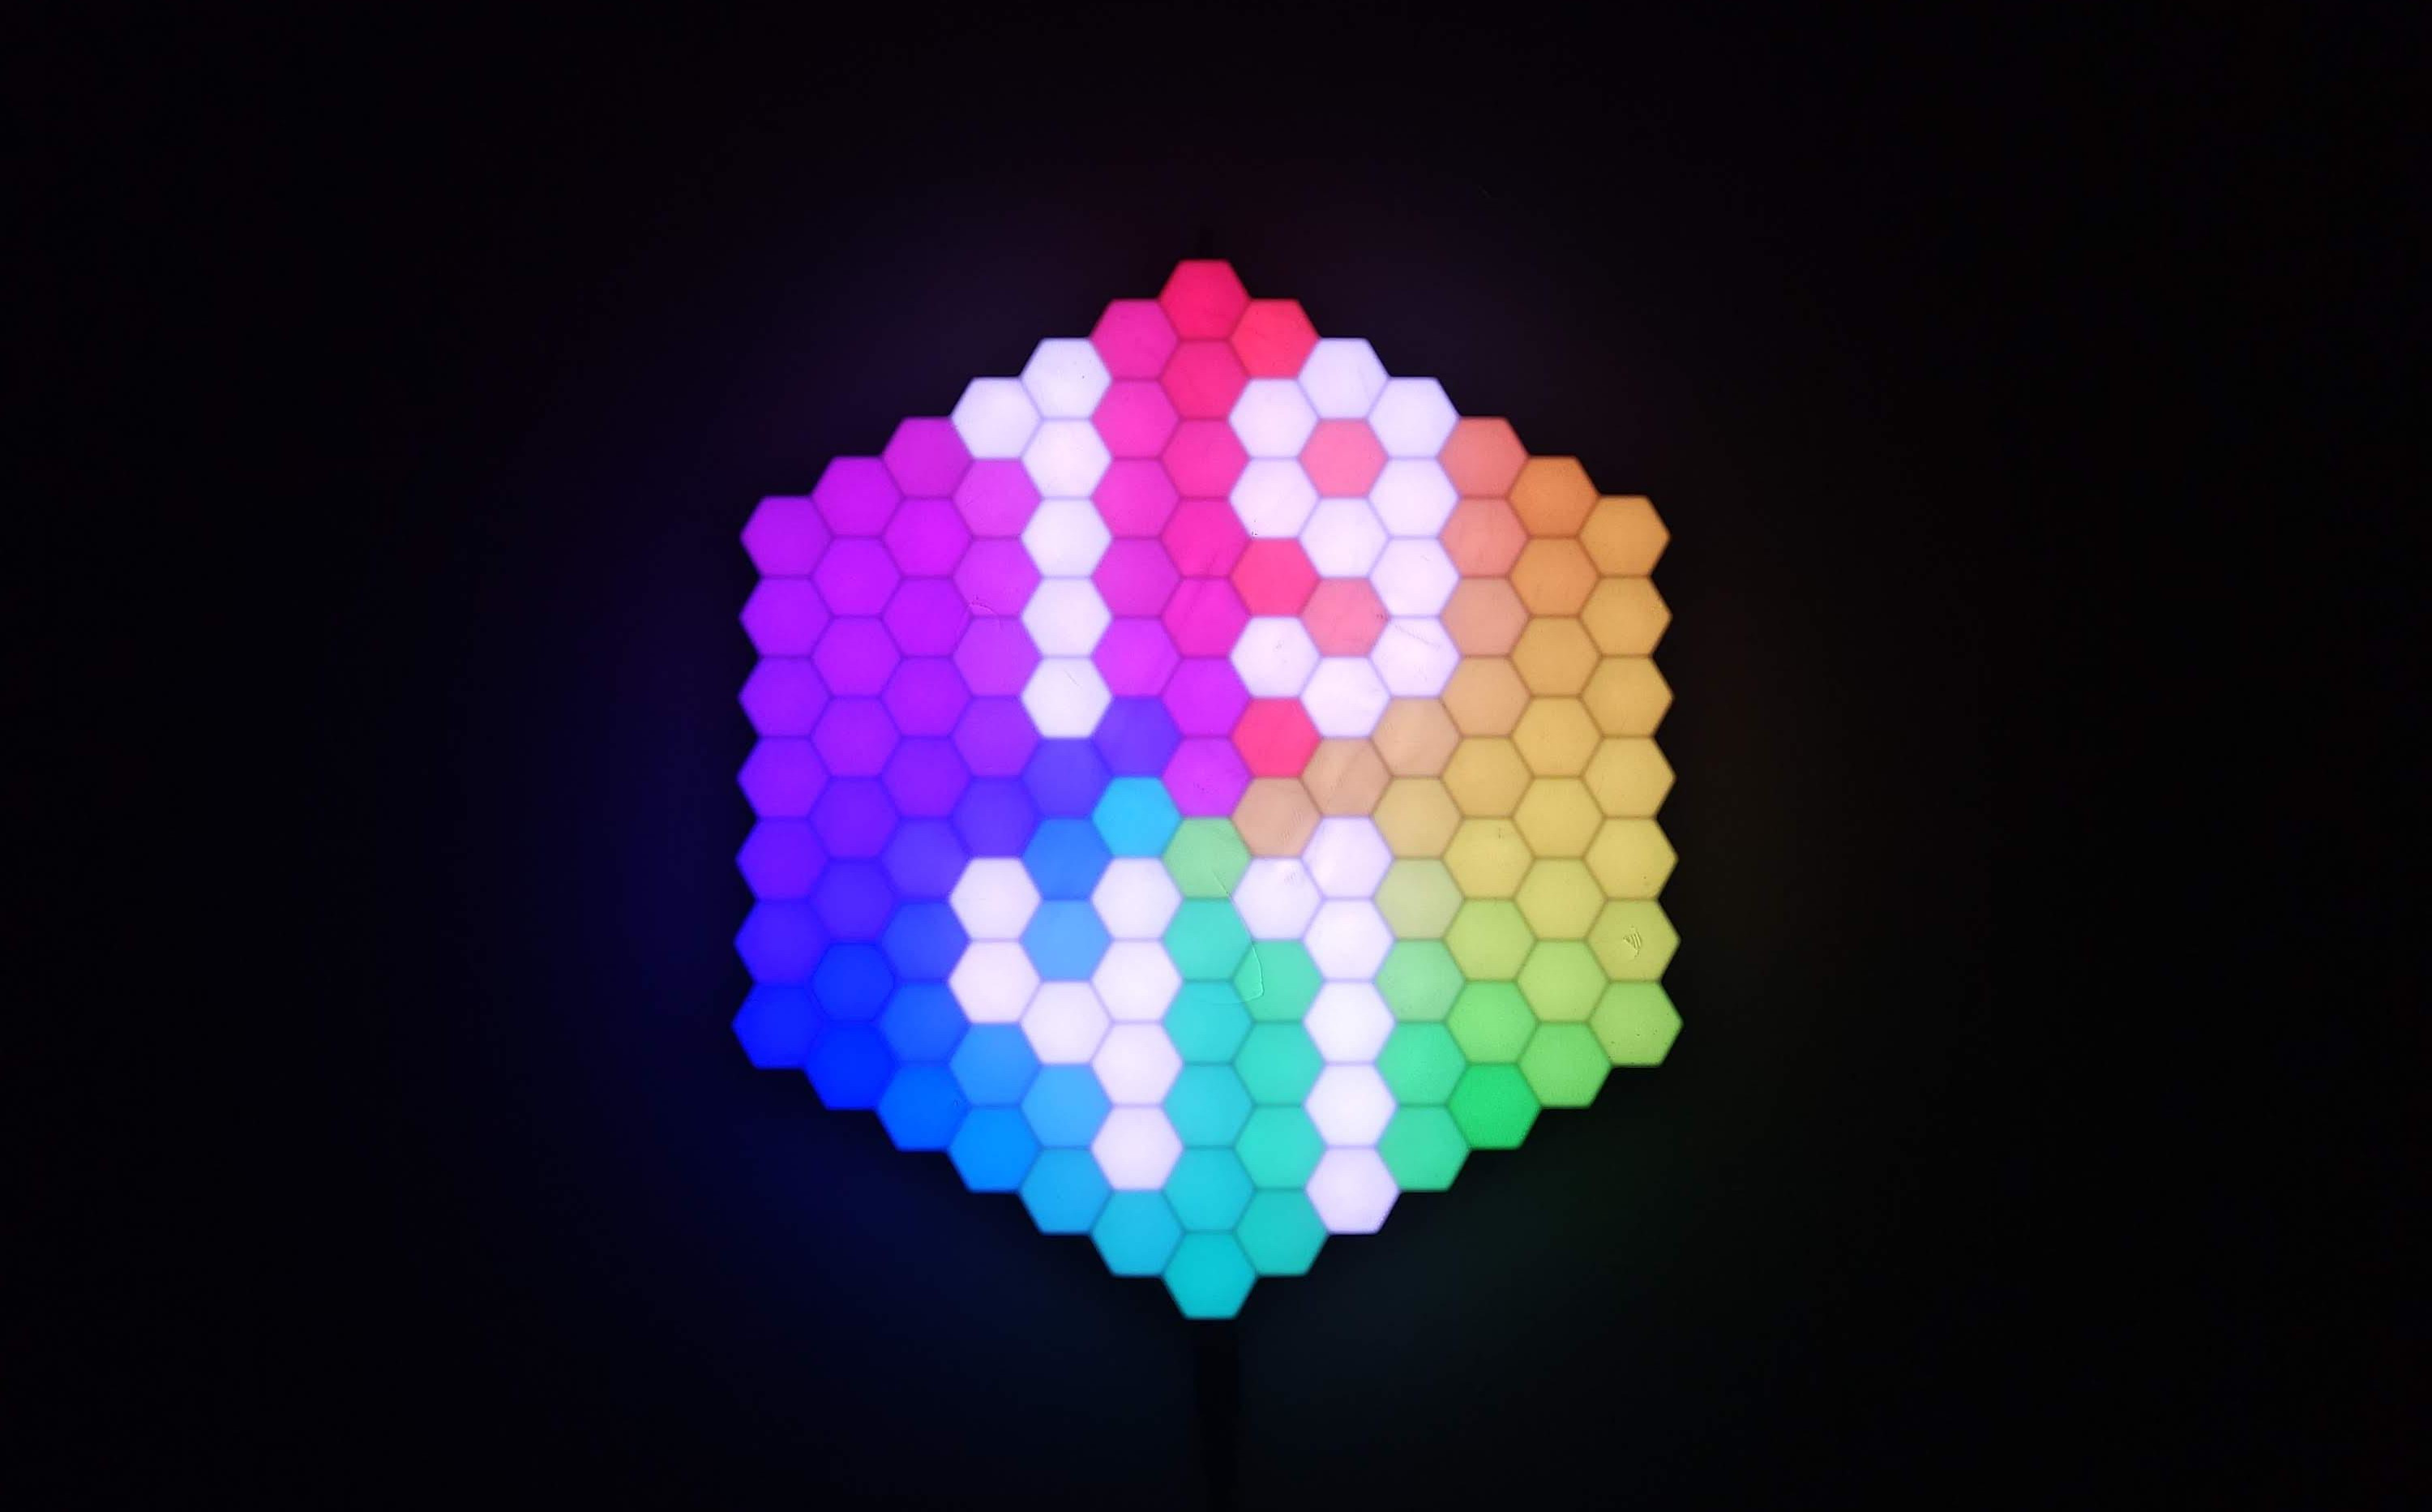 RGB LED HexaClock Doesn’t Actually Light Up the Night